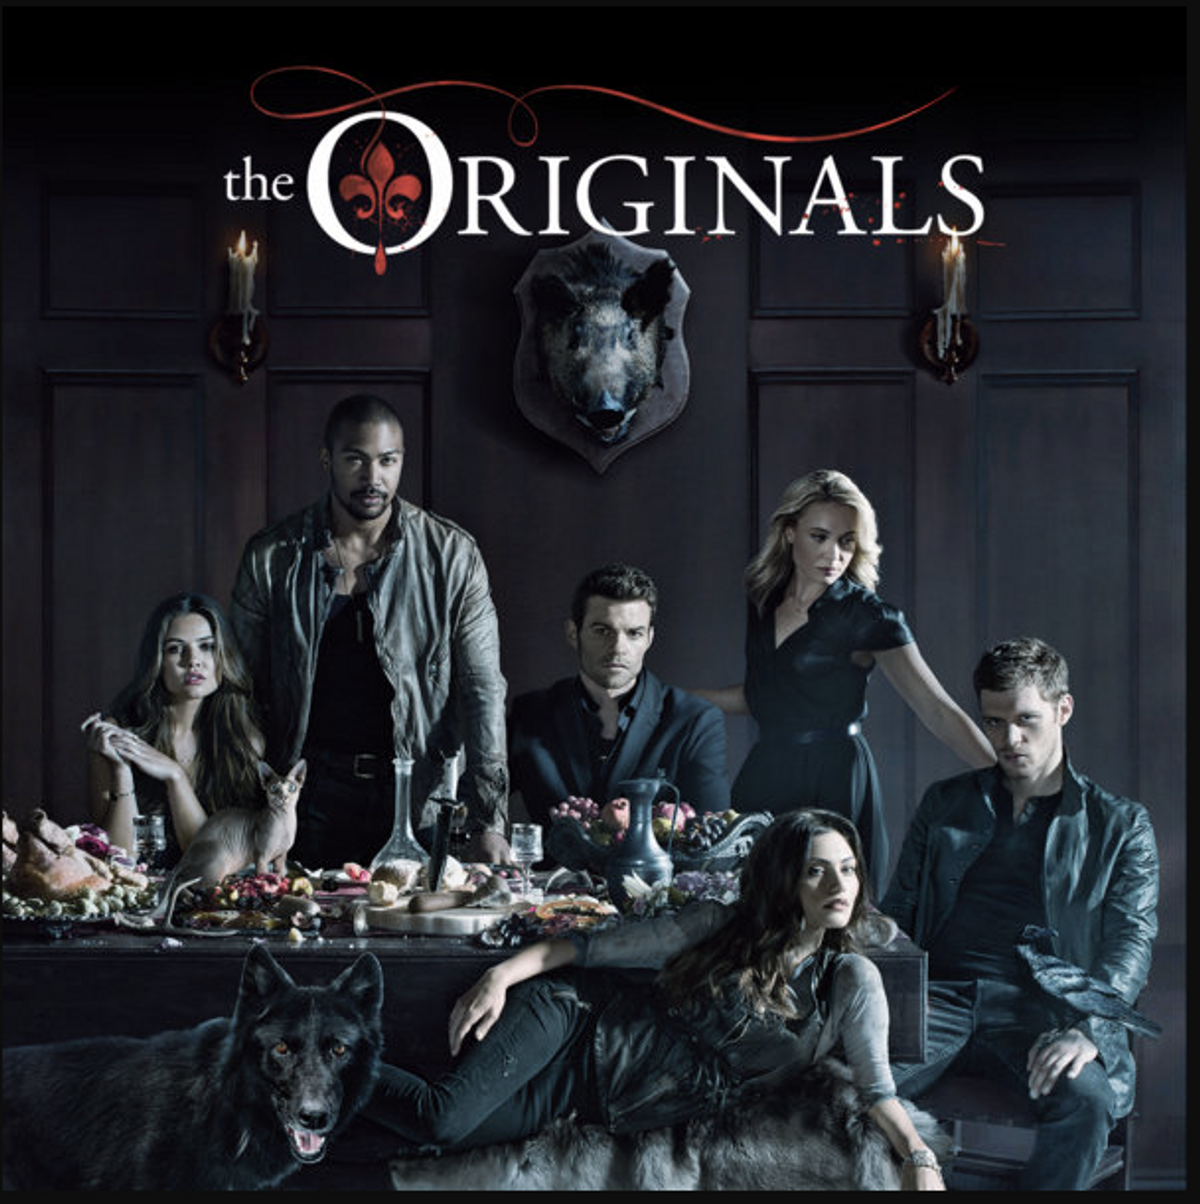 4 Quotes From Season One Of  "The Originals" That Will Have You Really Thinking About Life